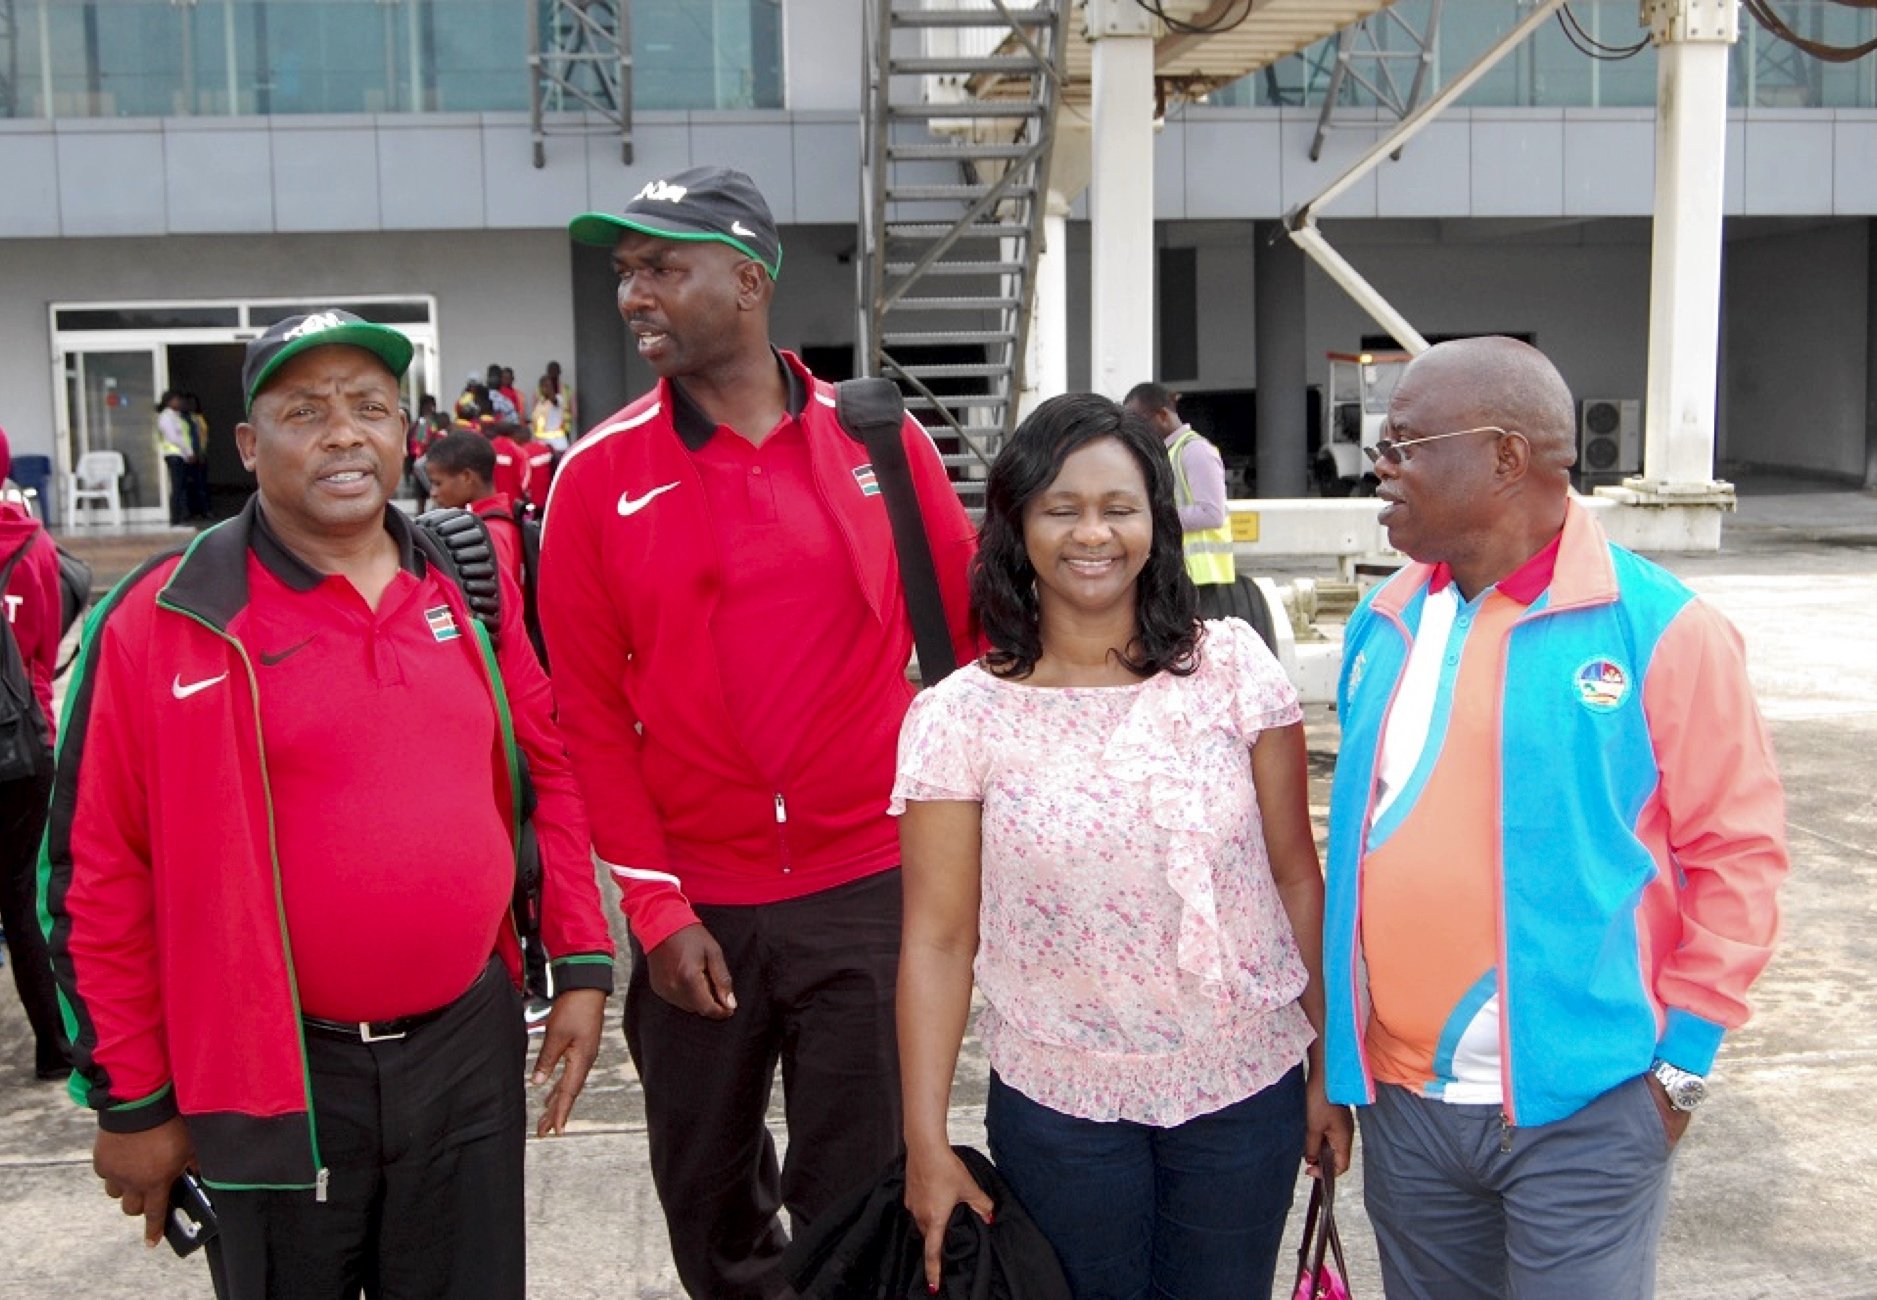 The Chair of the Asaba 2018 LOC, Chief Solomon Ogba, chats with officials of Athletics Kenya during the Kenyan team arrival at the Asaba International Airport for the 2018 African Senior Championships - 31 July, 2018. / Photo: LOC